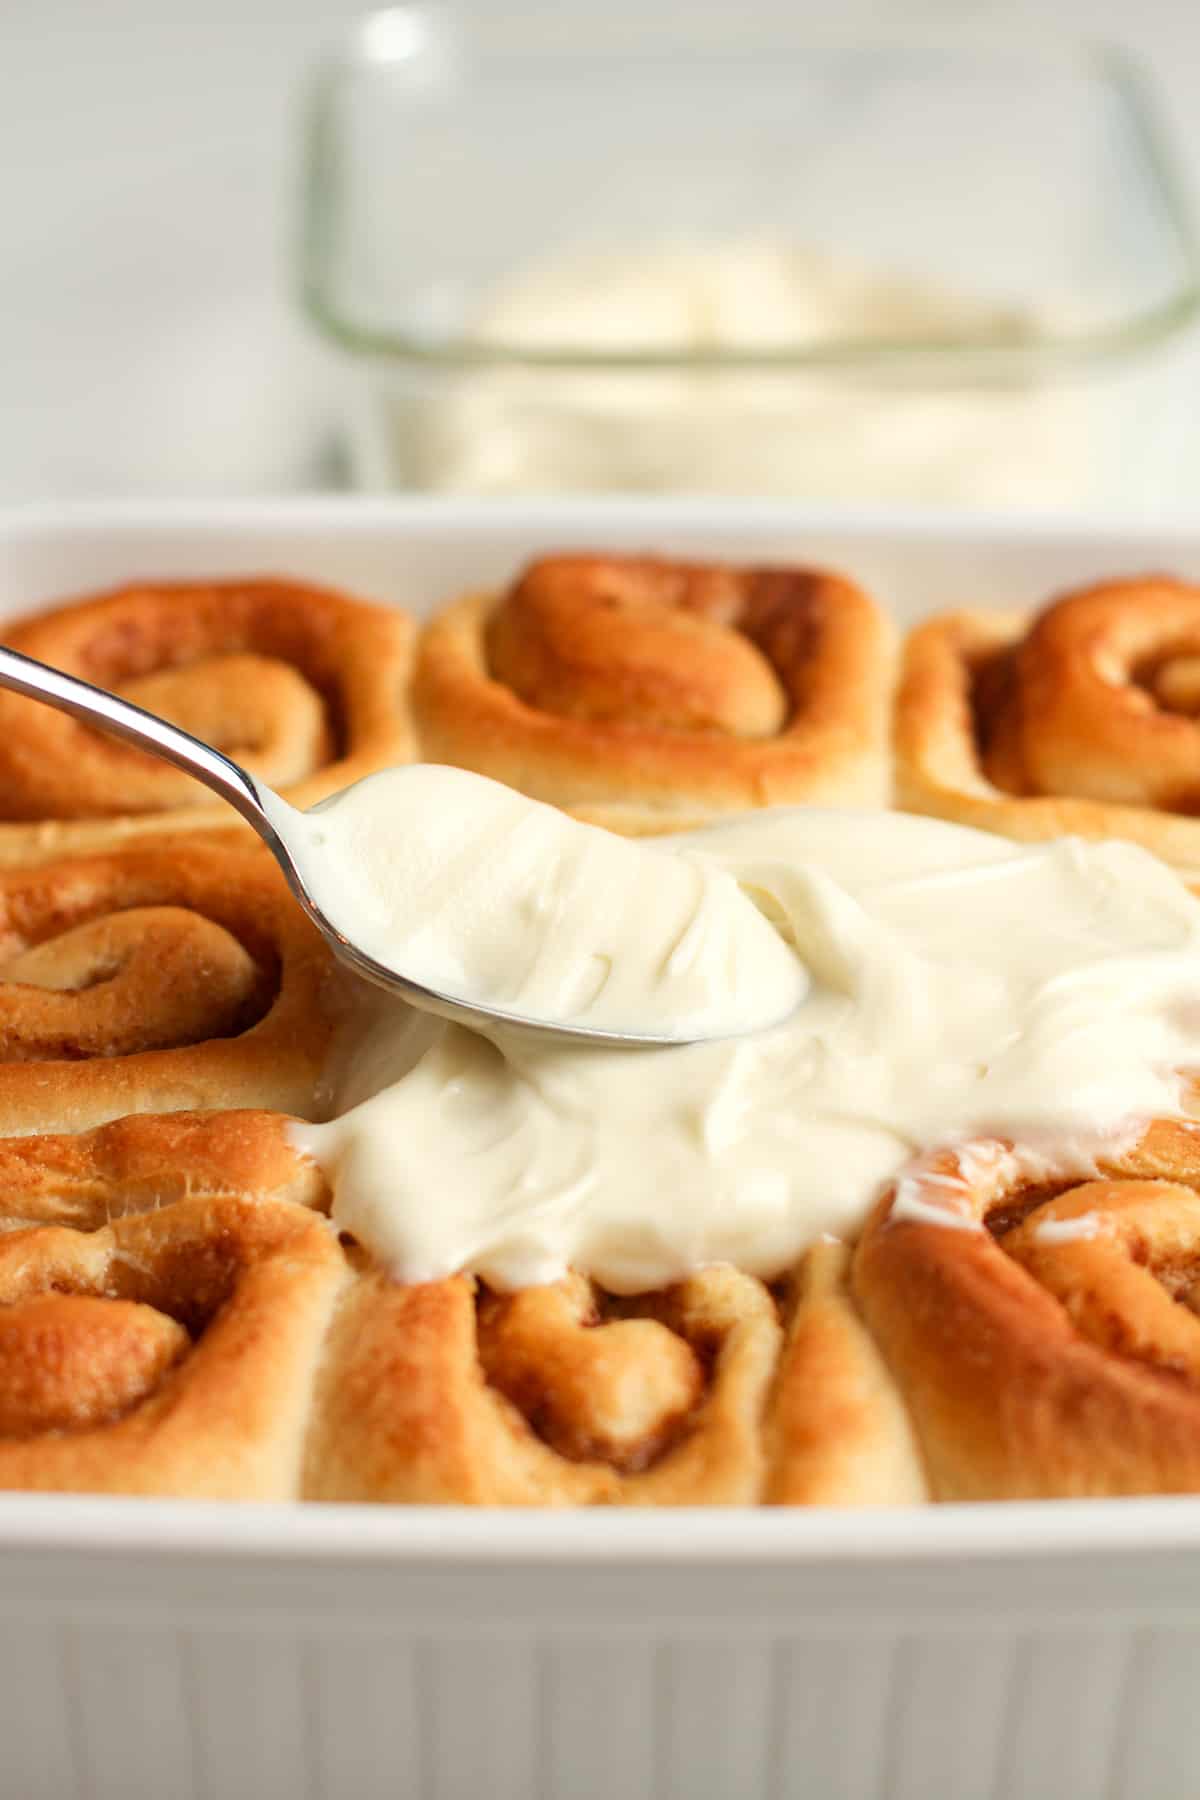 Side shot of a spoonful of frosting on the baked rolls.